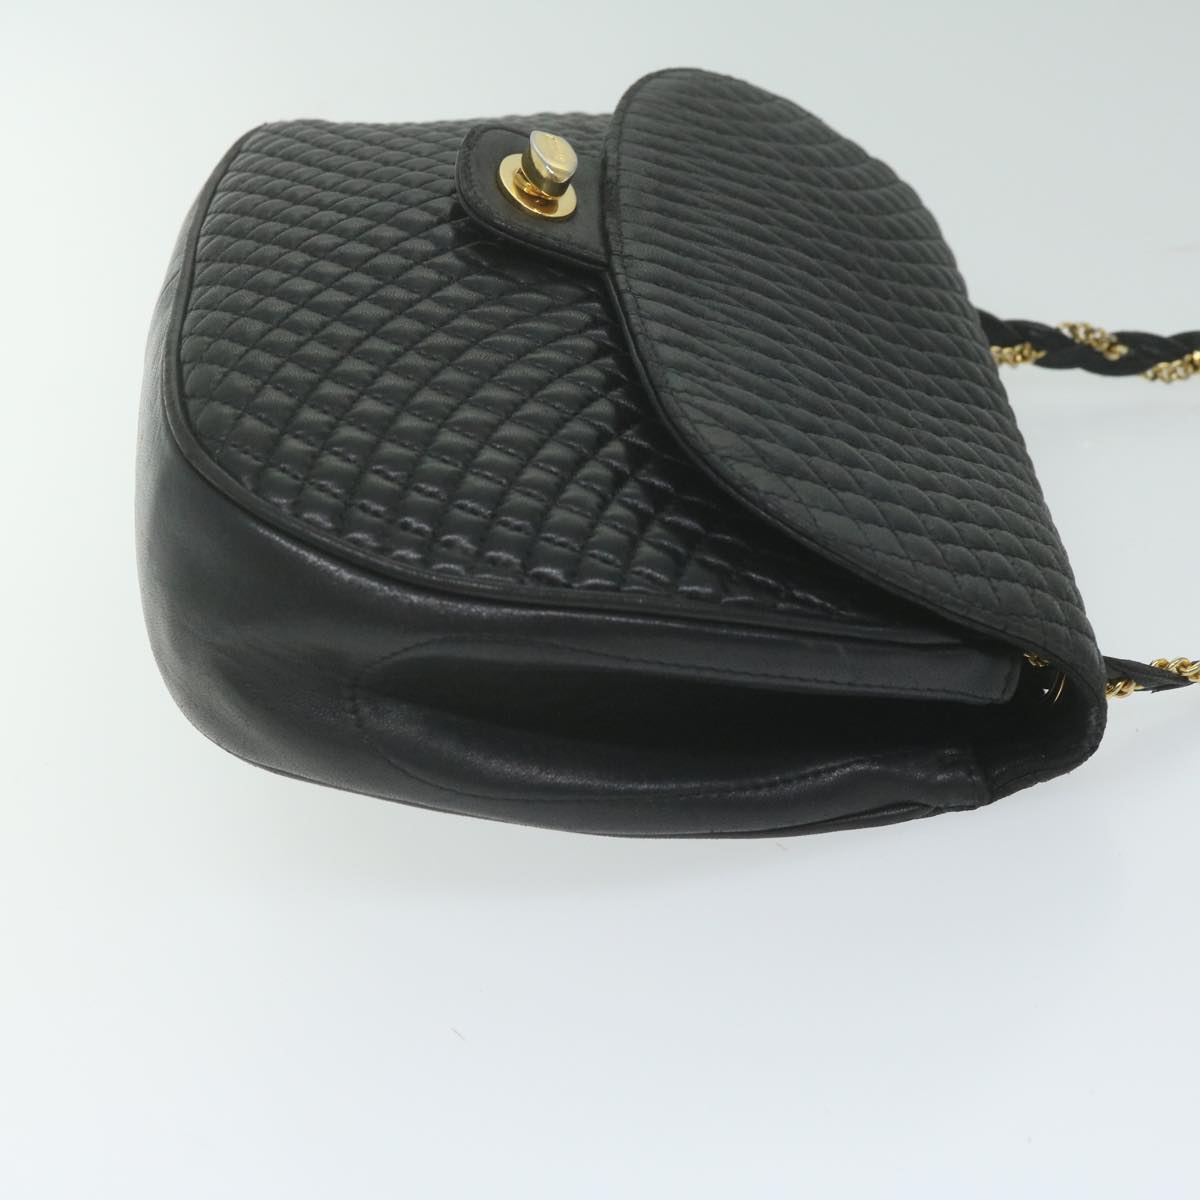 BALLY Quilted Chain Shoulder Bag Leather Black Auth am5550